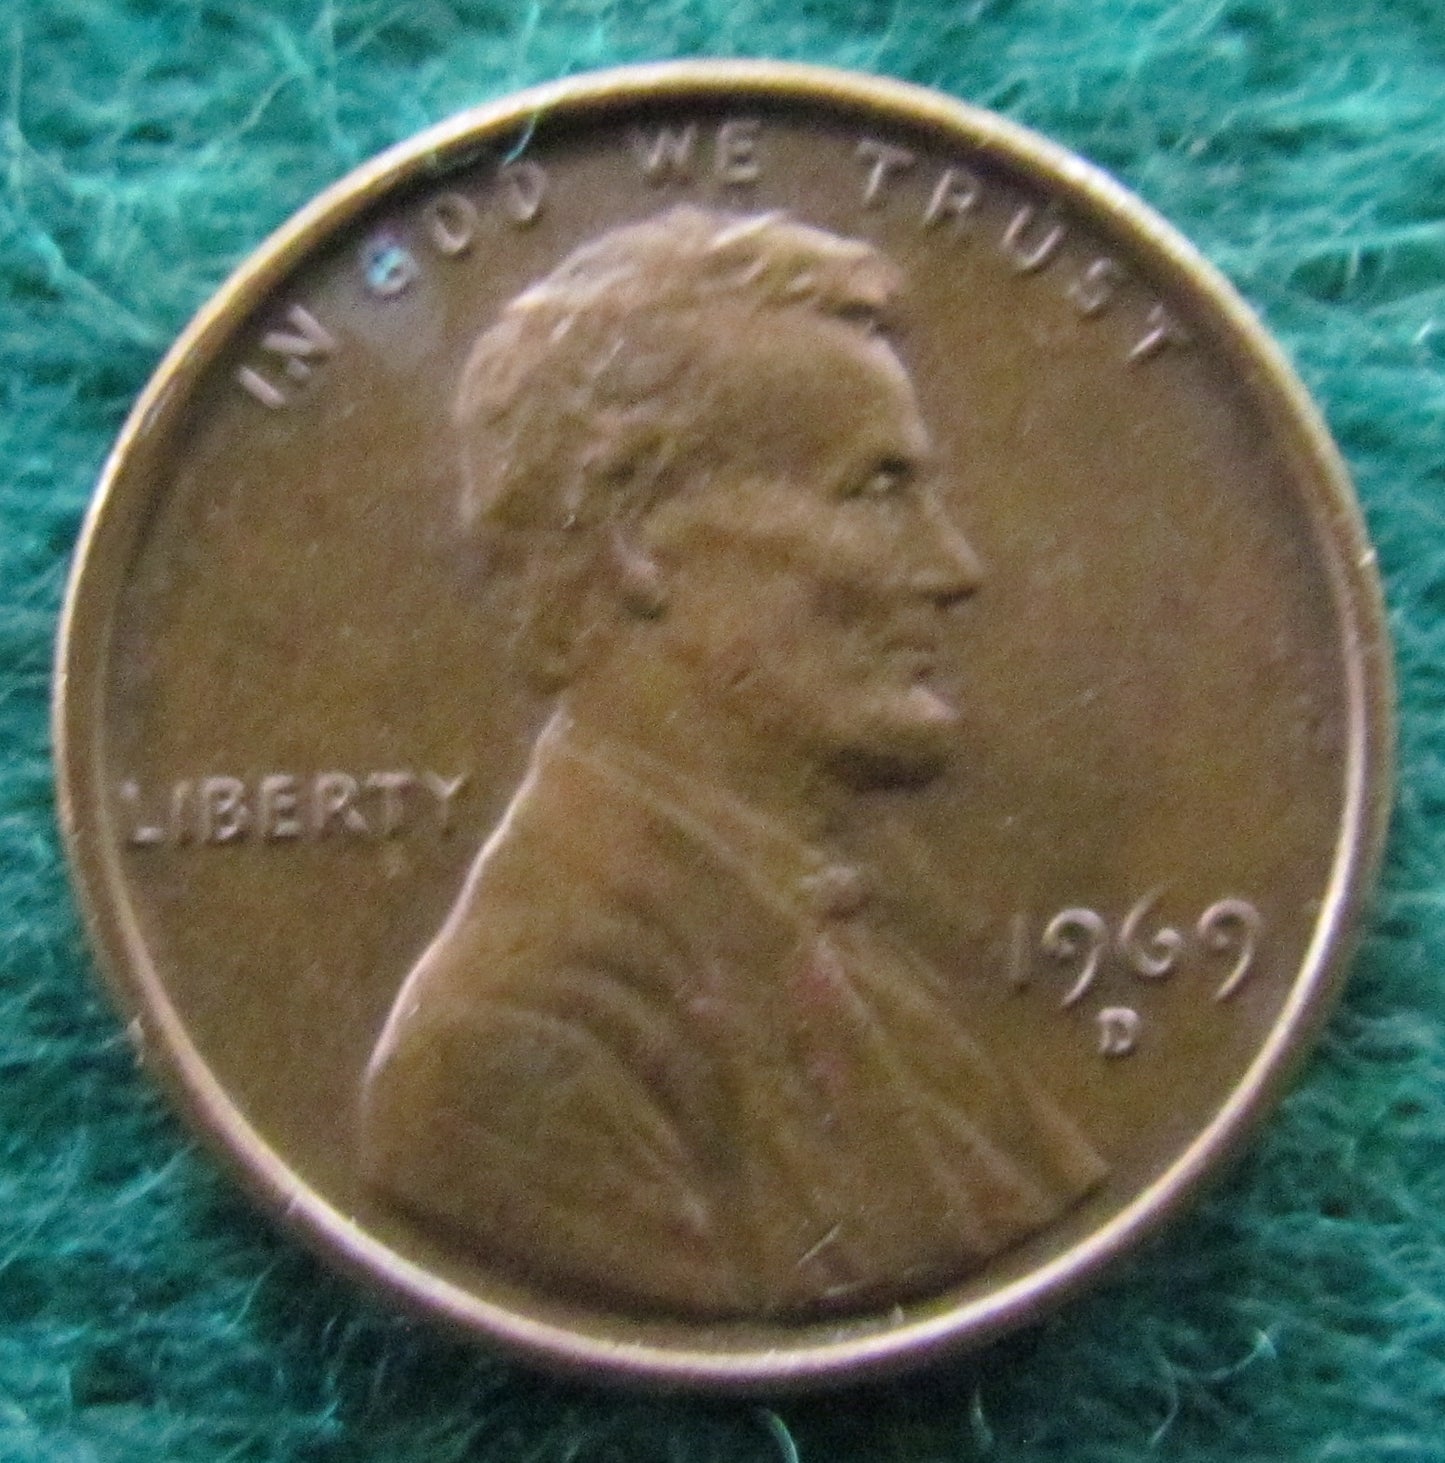 USA American 1969 D 1 Cent Lincoln Memorial Coin - Circulated